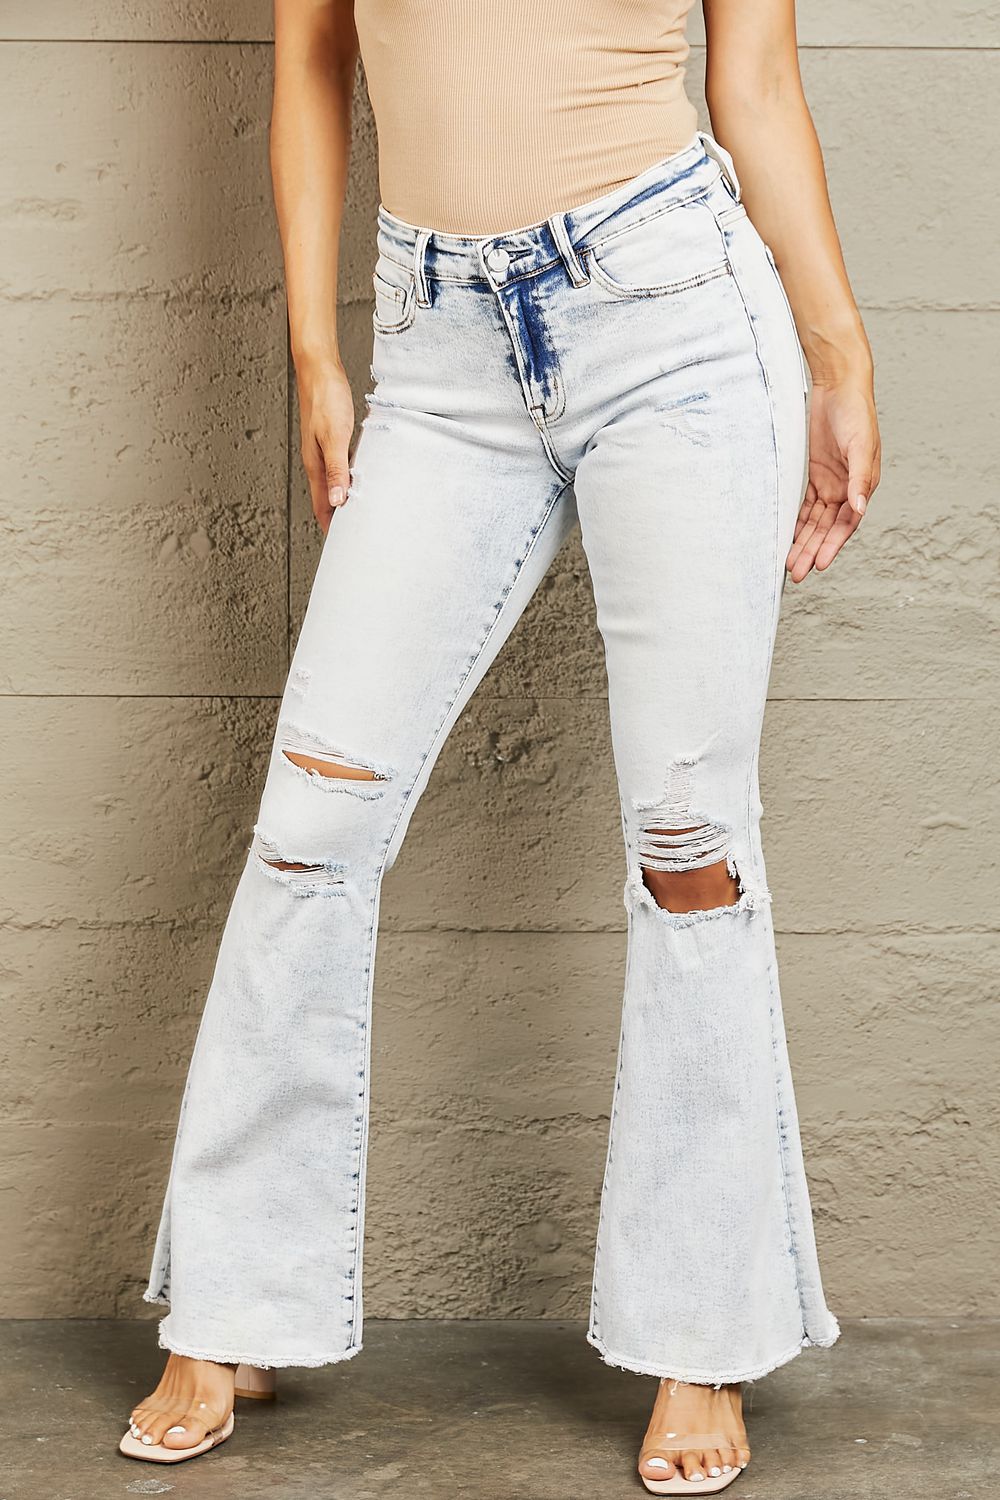 BAYEAS Mid Rise Acid Wash Distressed Jeans - nailedmoms